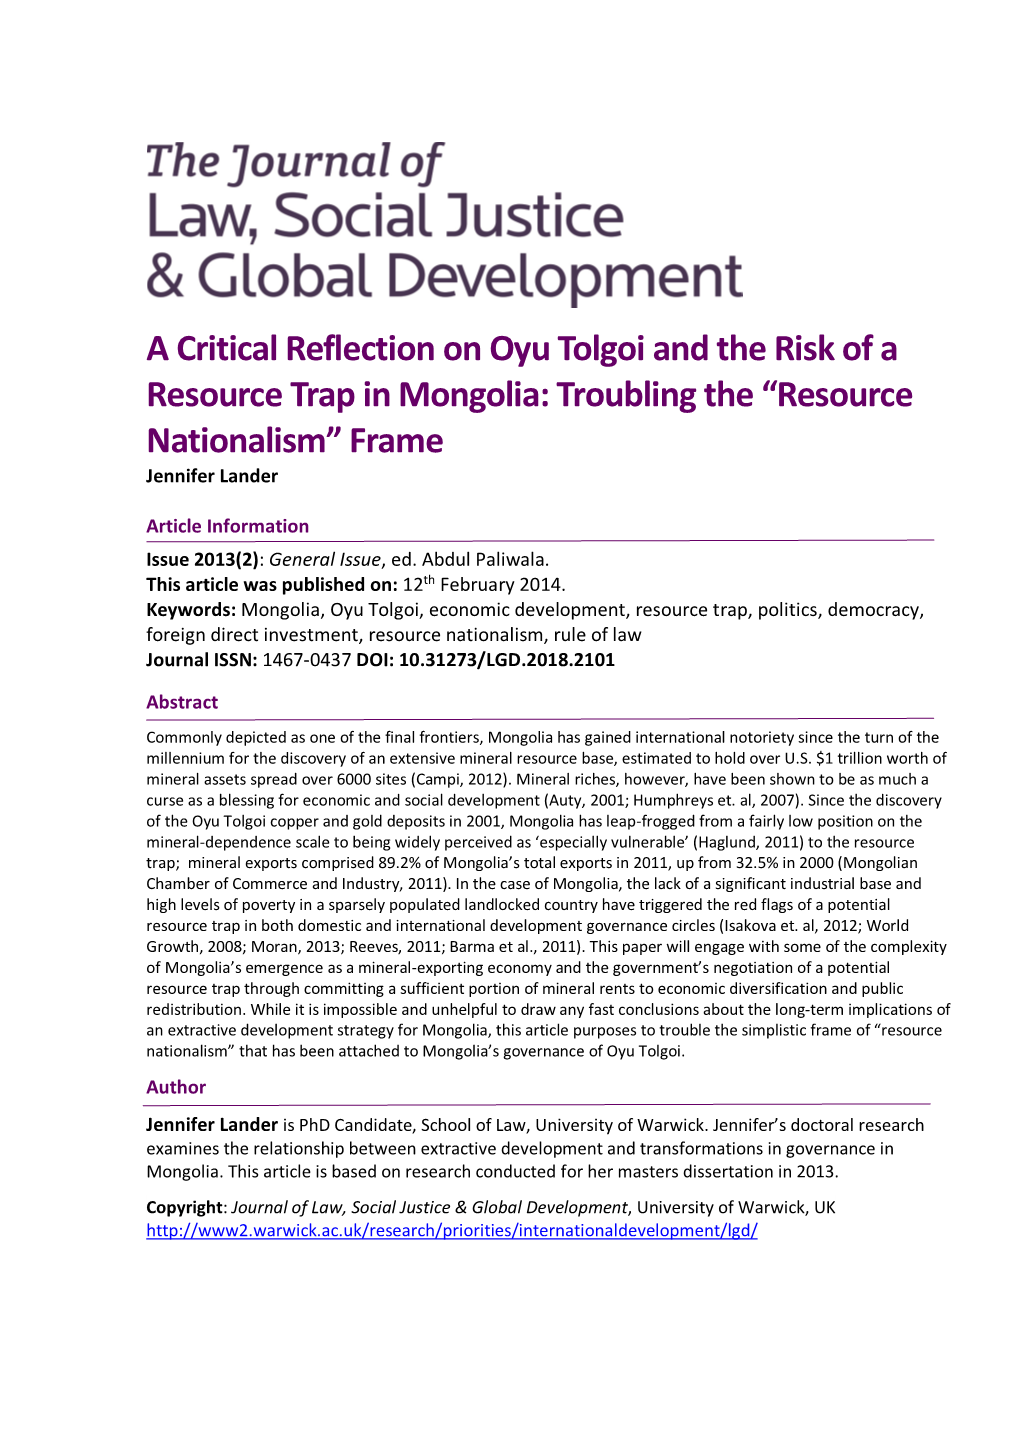 A Critical Reflection on Oyu Tolgoi and the Risk of a Resource Trap in Mongolia: Troubling the “Resource Nationalism” Frame Jennifer Lander